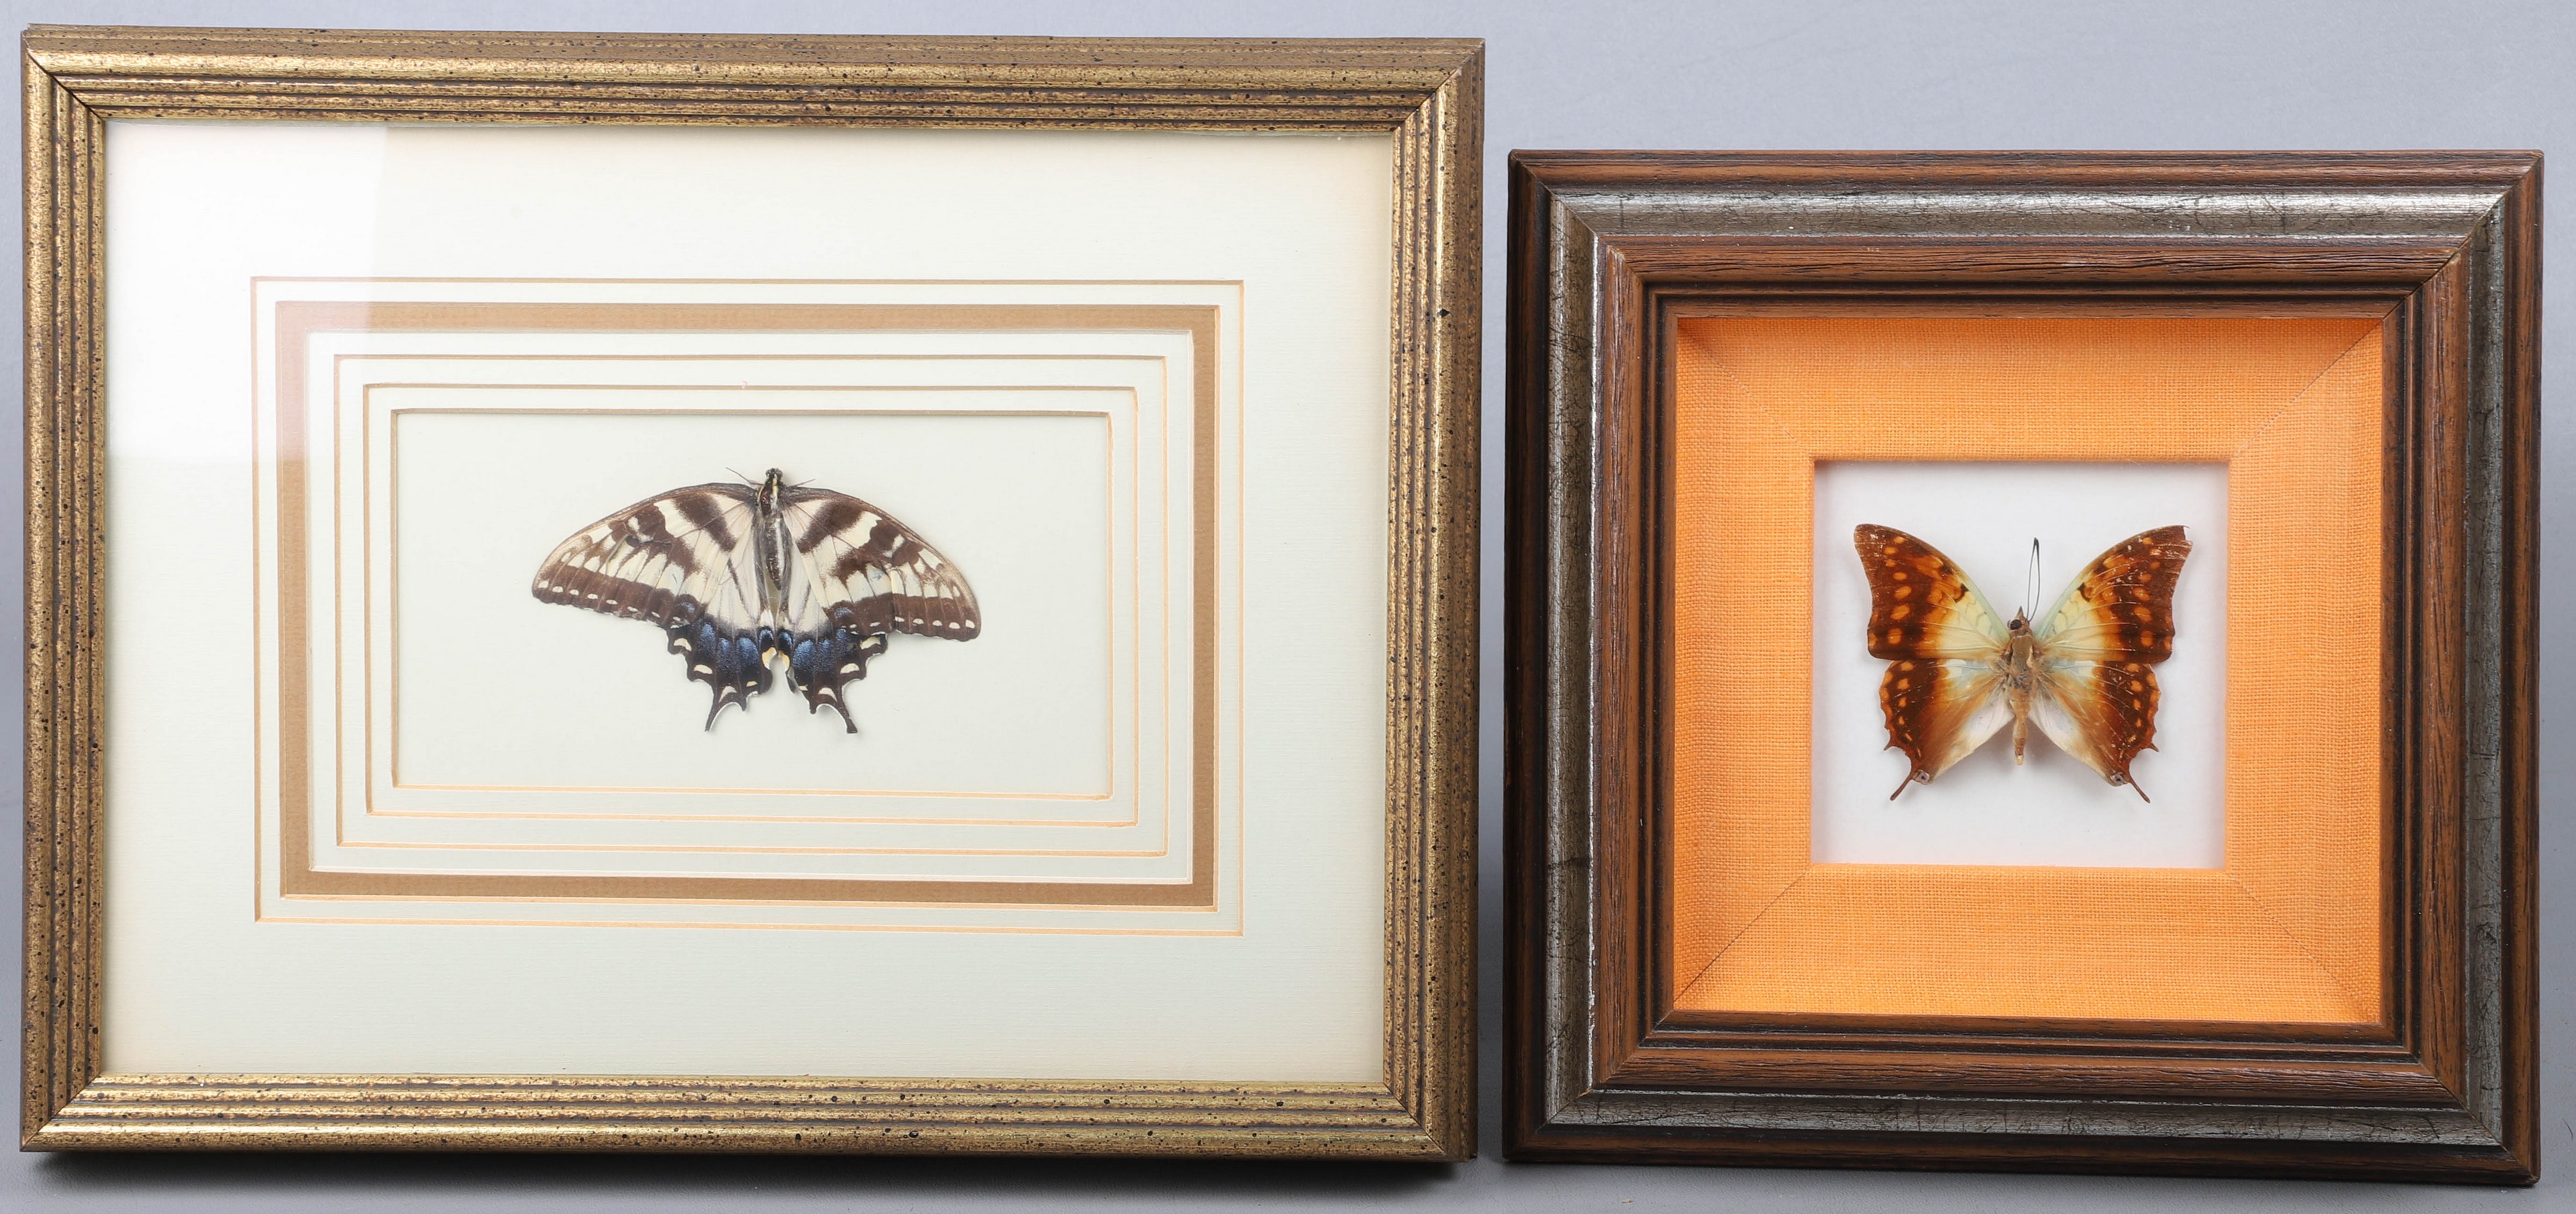  2 Shadow box mounted butterfly 317d4d